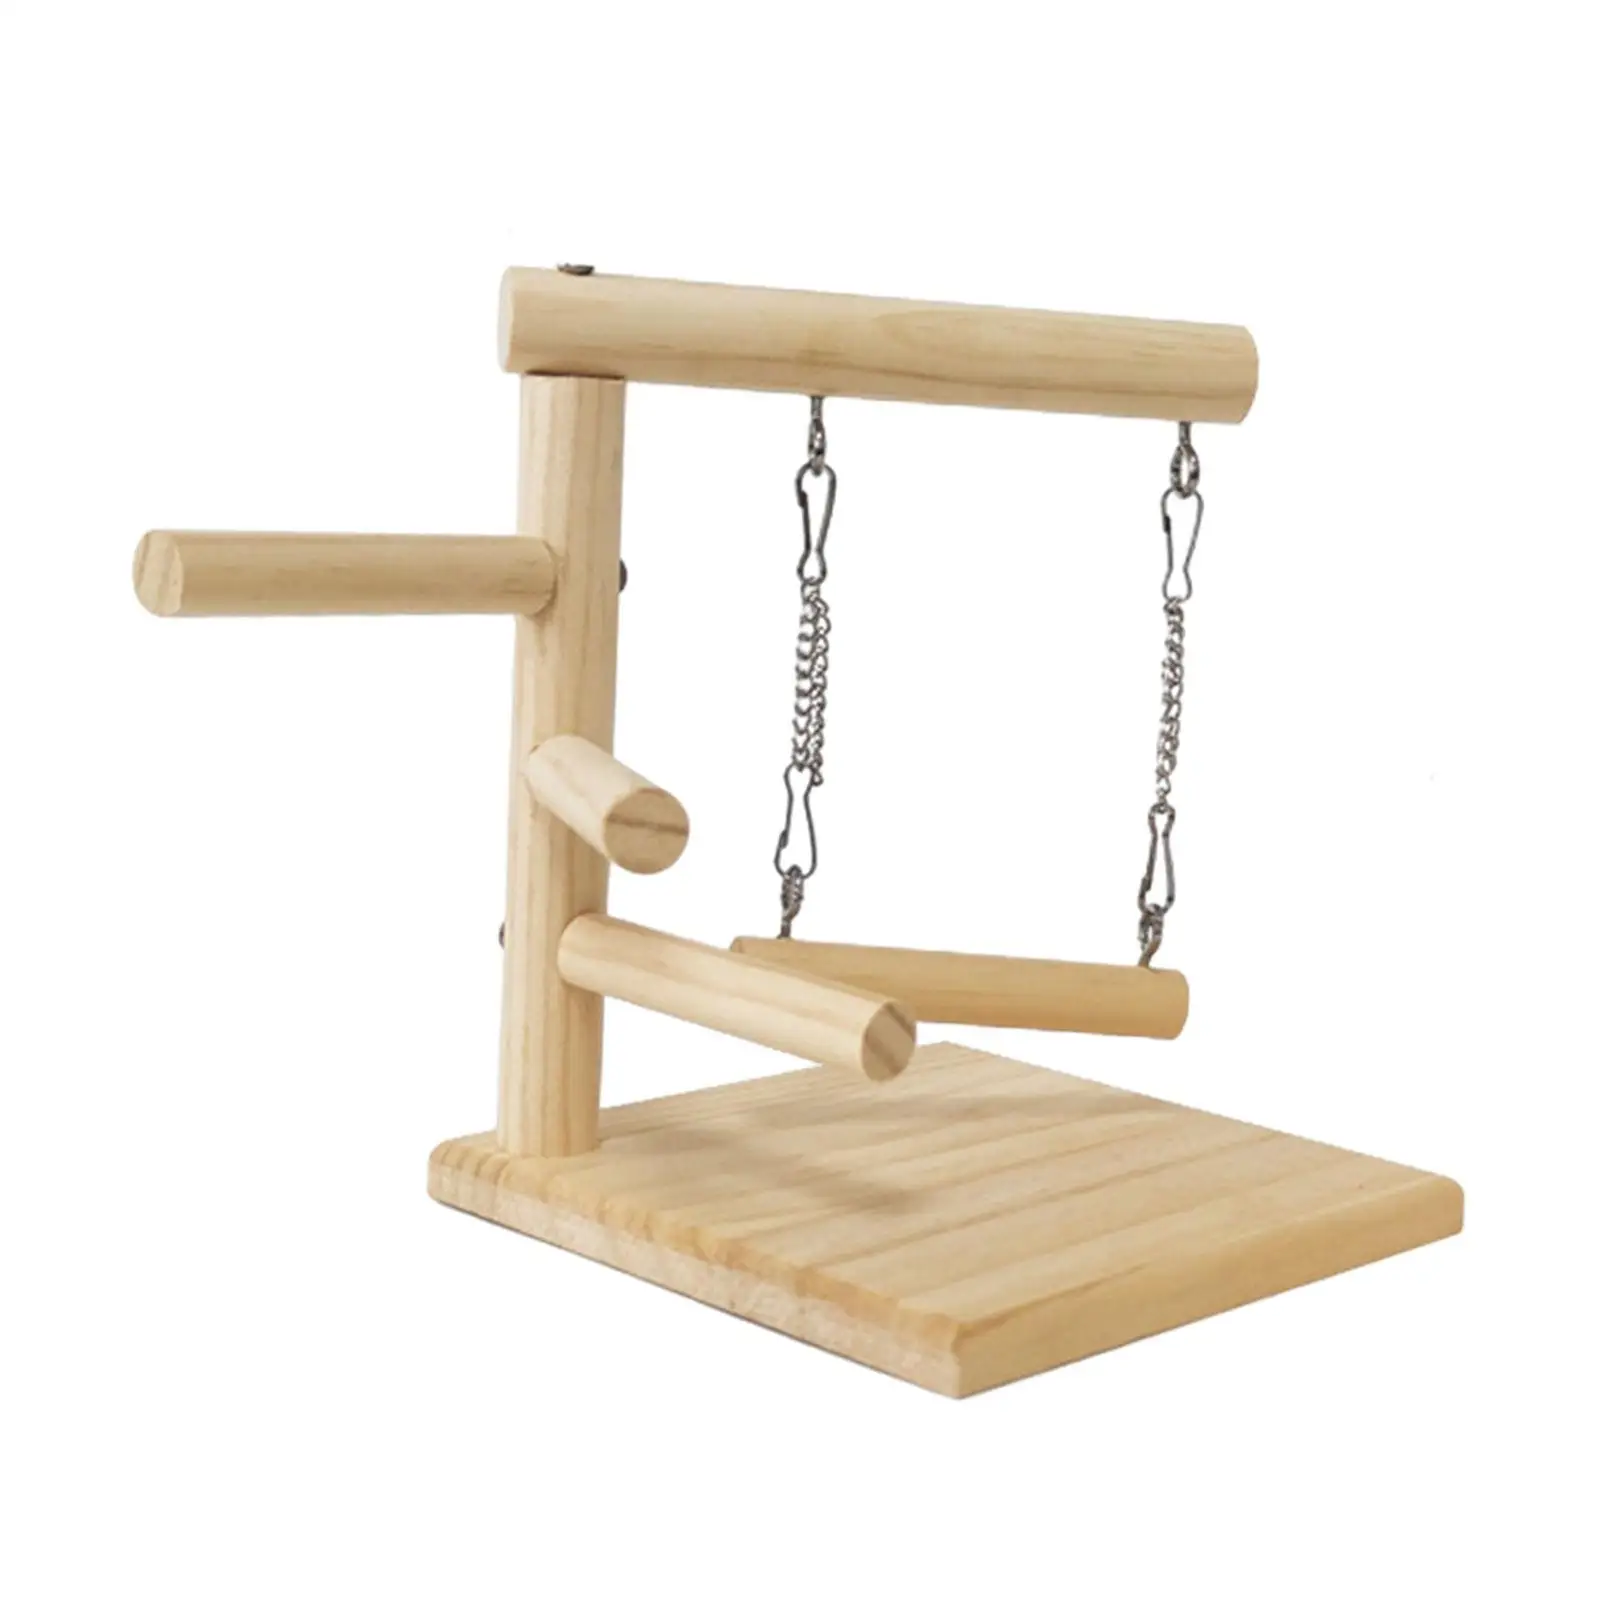 Parrot Playground Bird Gym Exercise Gym Playground Bird Tabletop Training Perch Play Stand for Canaries Cockatiels